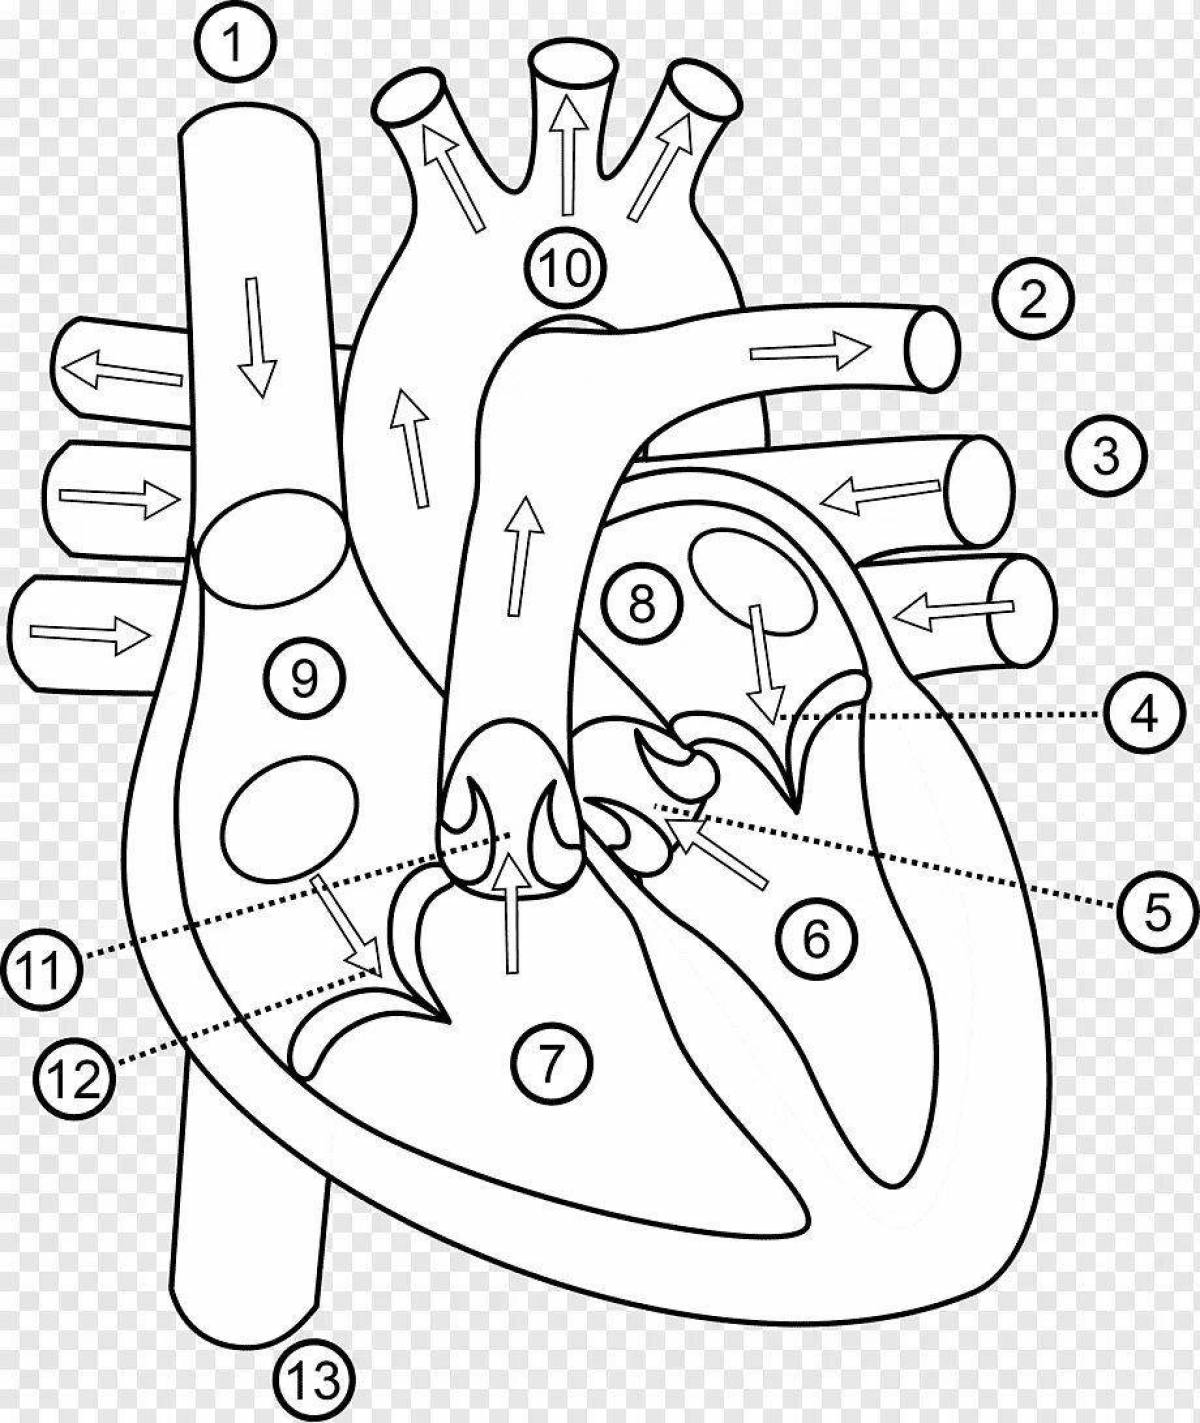 Amazing anatomy coloring page